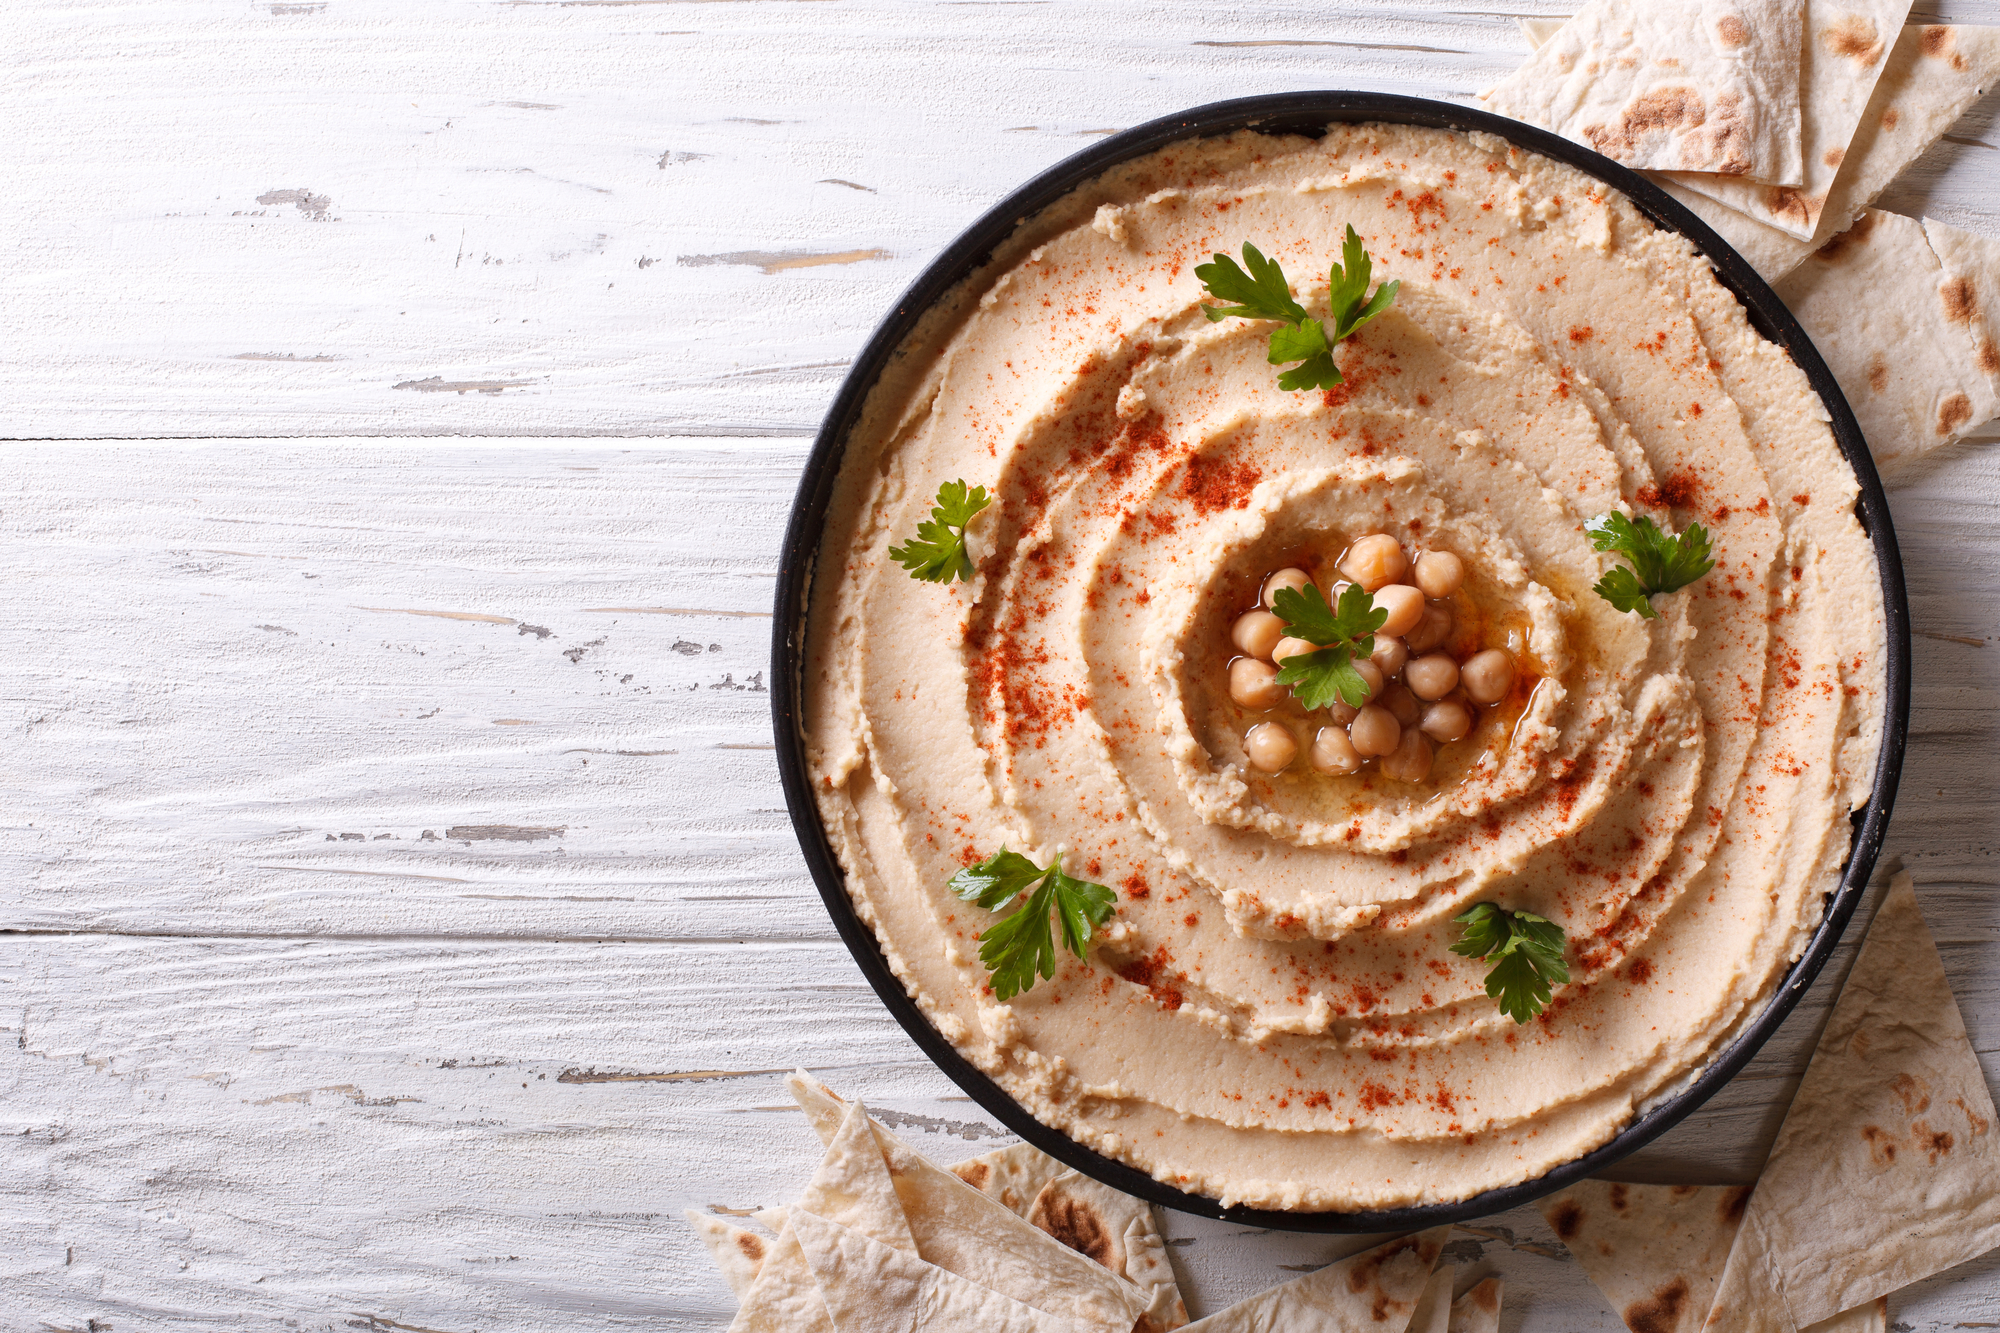 13 Mouth-Watering Hummus Recipes for Weight Loss - The Fit Mother Project -  Weight Loss For Busy Moms 40+